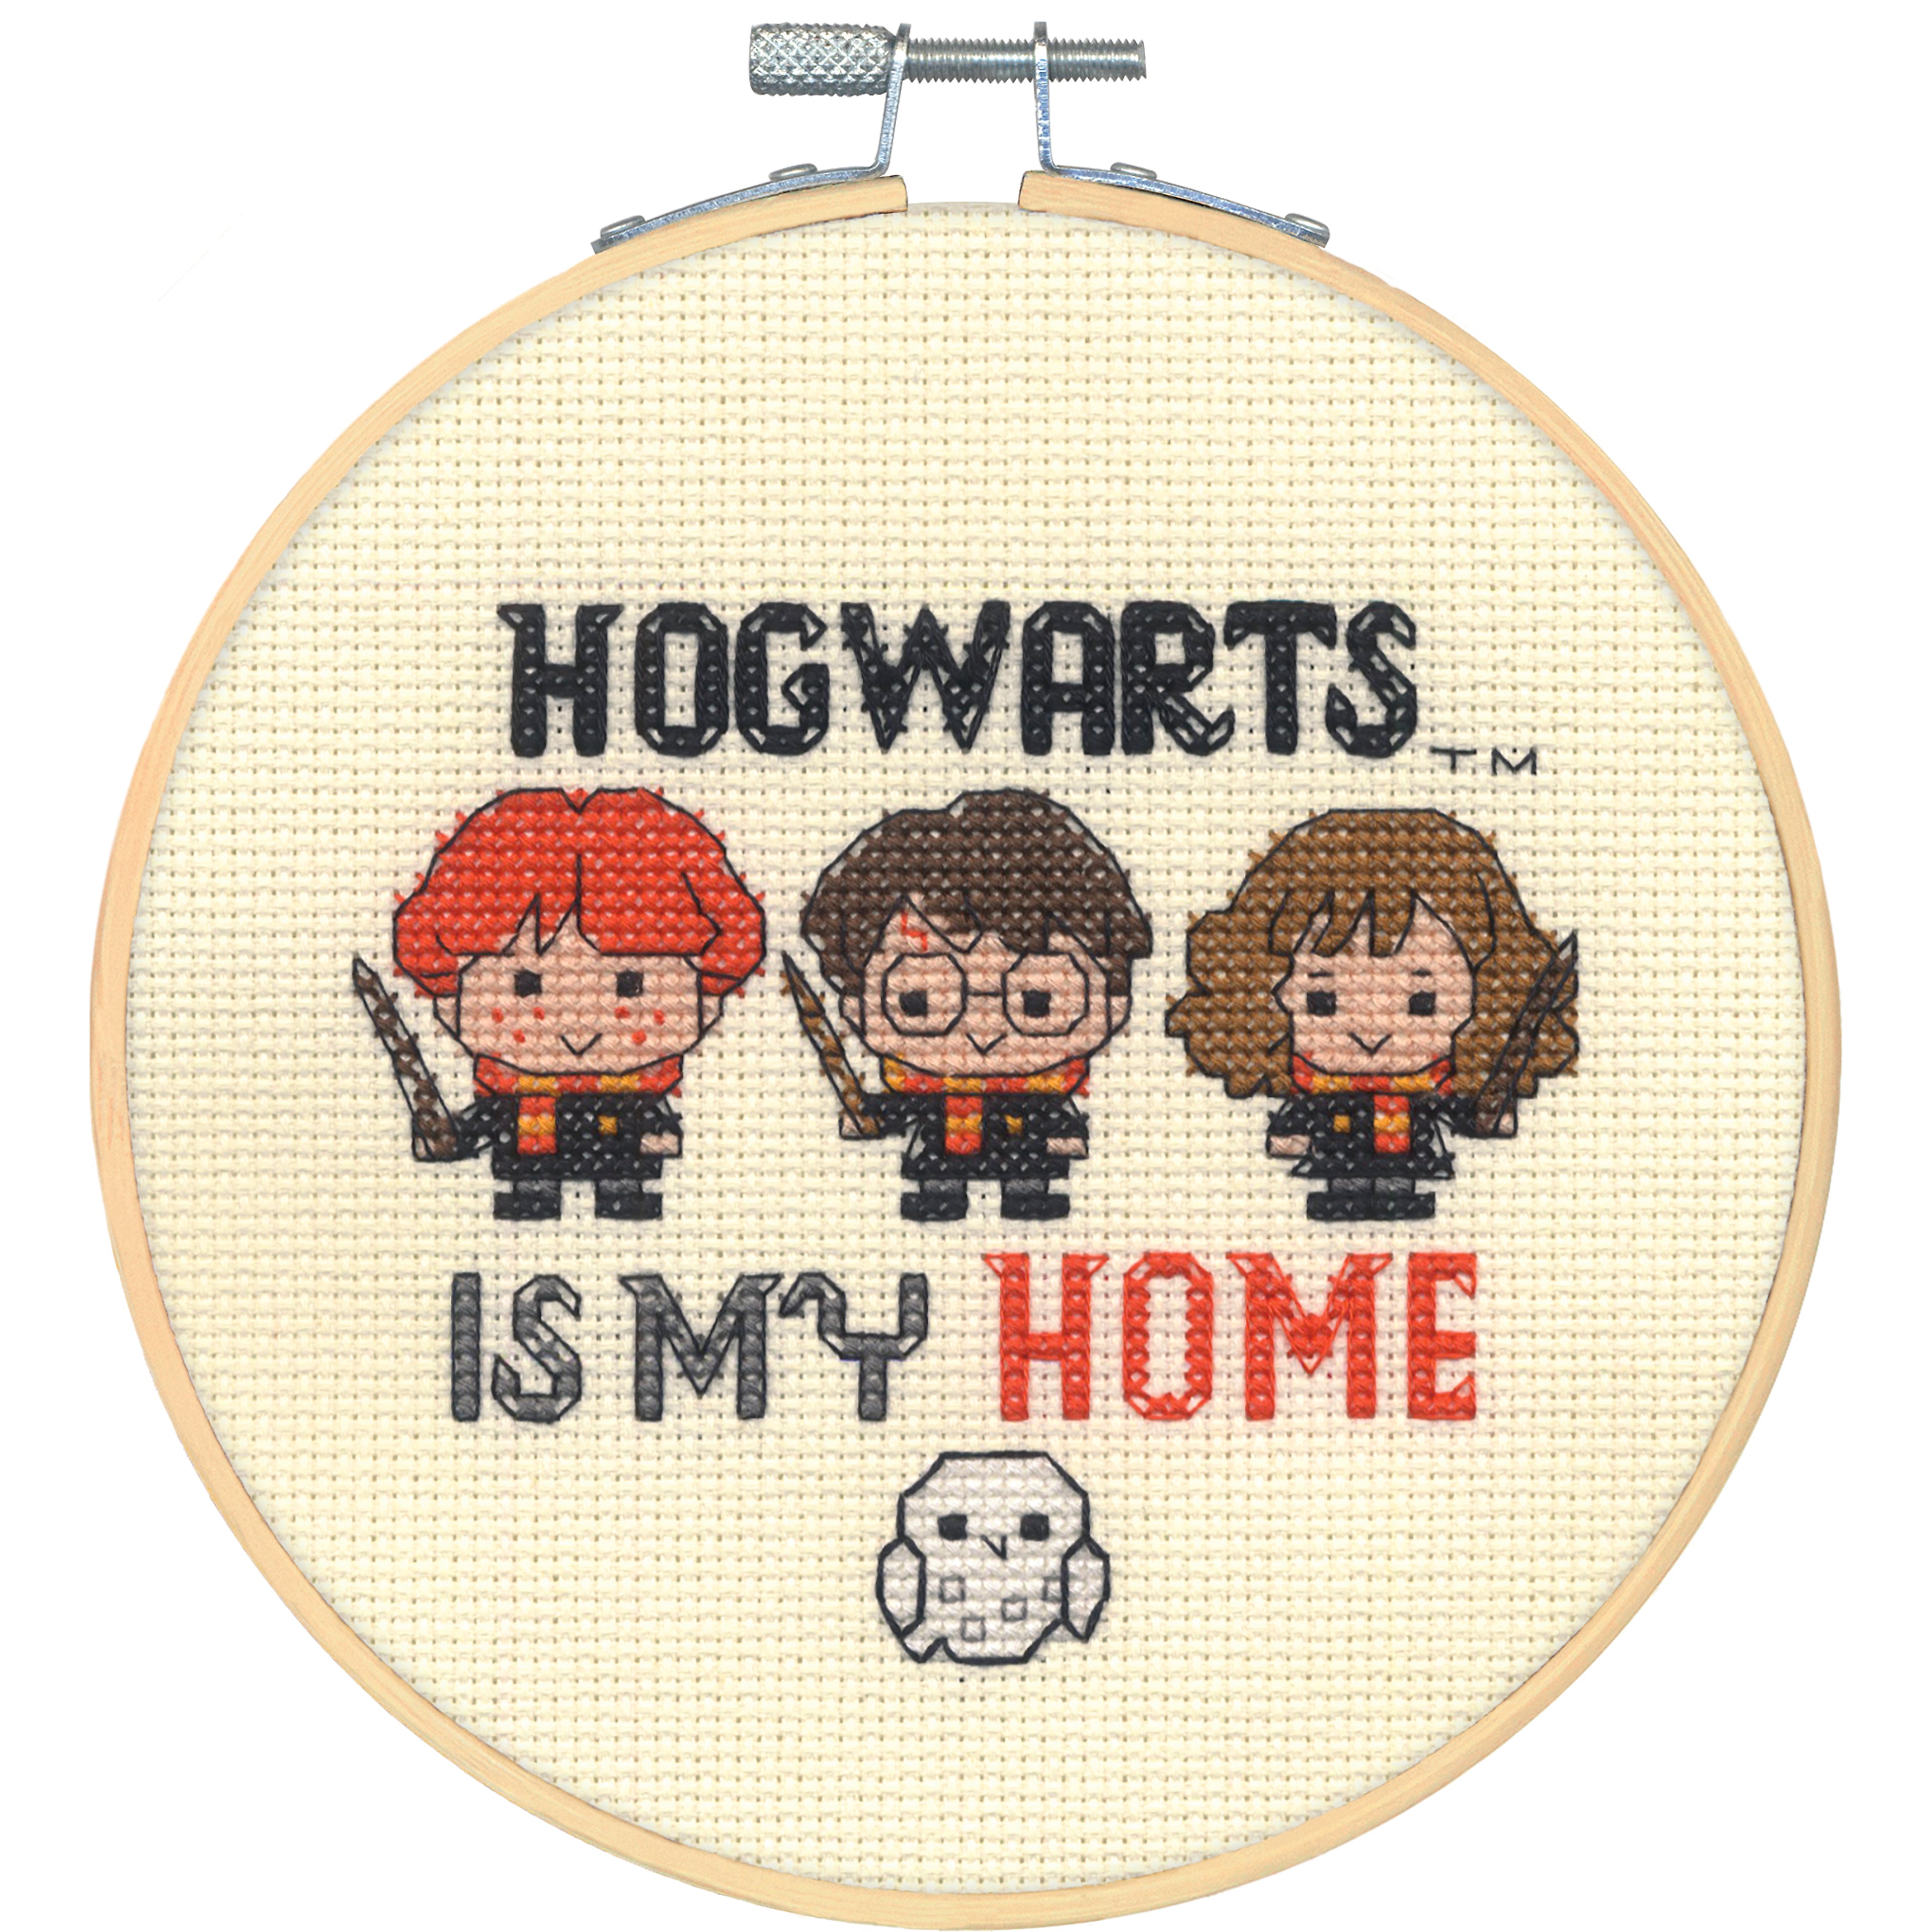 Snape Harry Potter Cross Stitch Kits Needlework Counted Kits Embroidery  Craft Cross-stitch DIY Home Dumbledore Ron Weasley Hermione Malfoy 